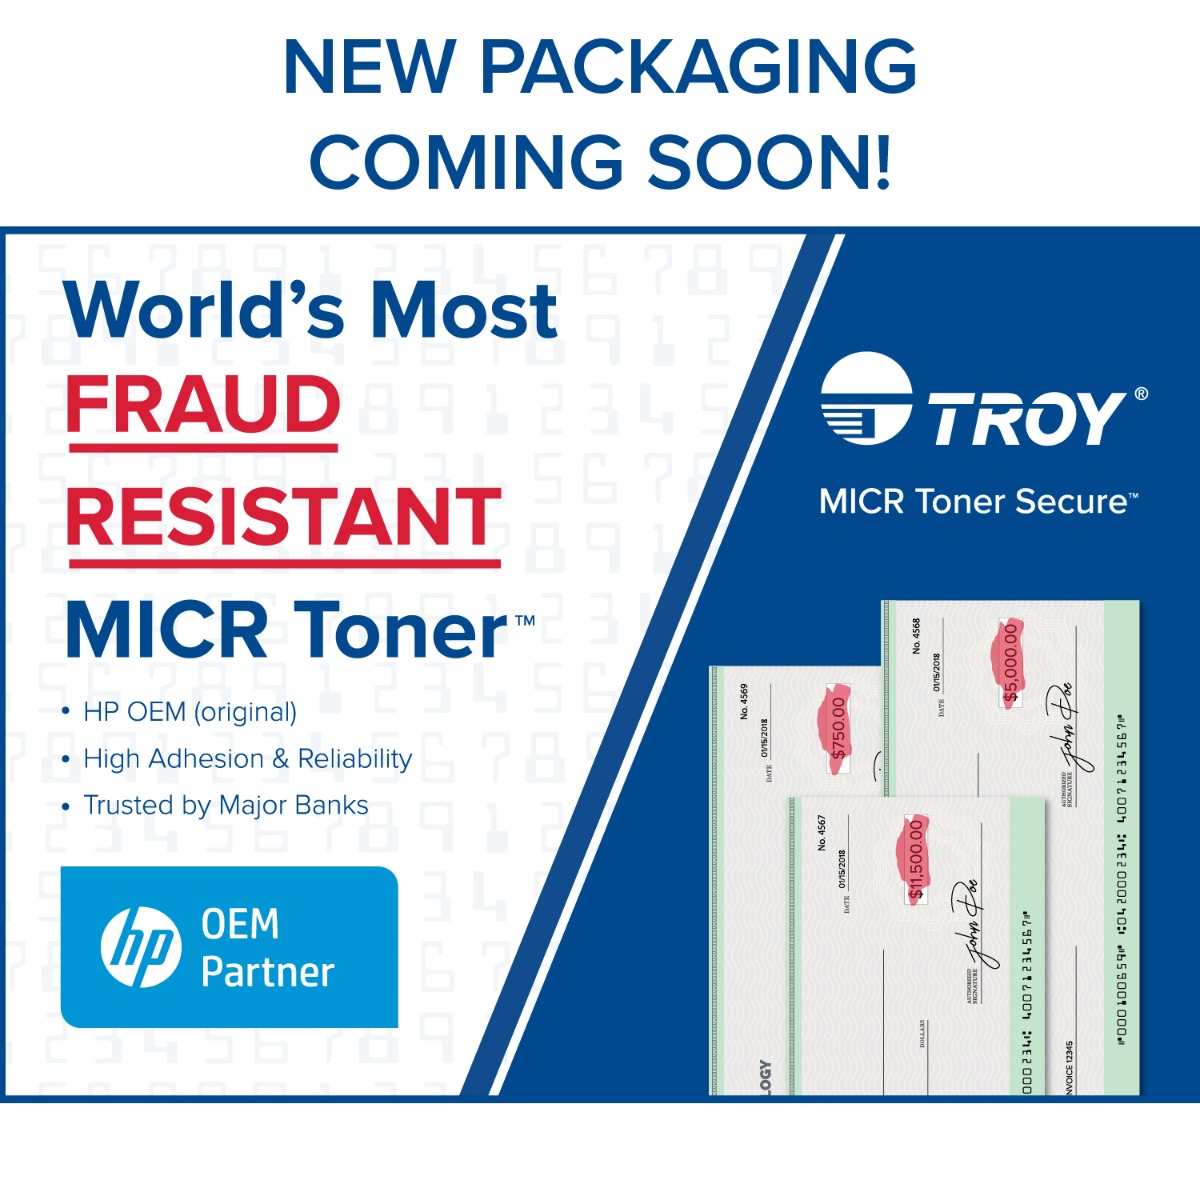 TROY Precision MICR Toner Secure Standard Yield Cartridge for Lexmark T630